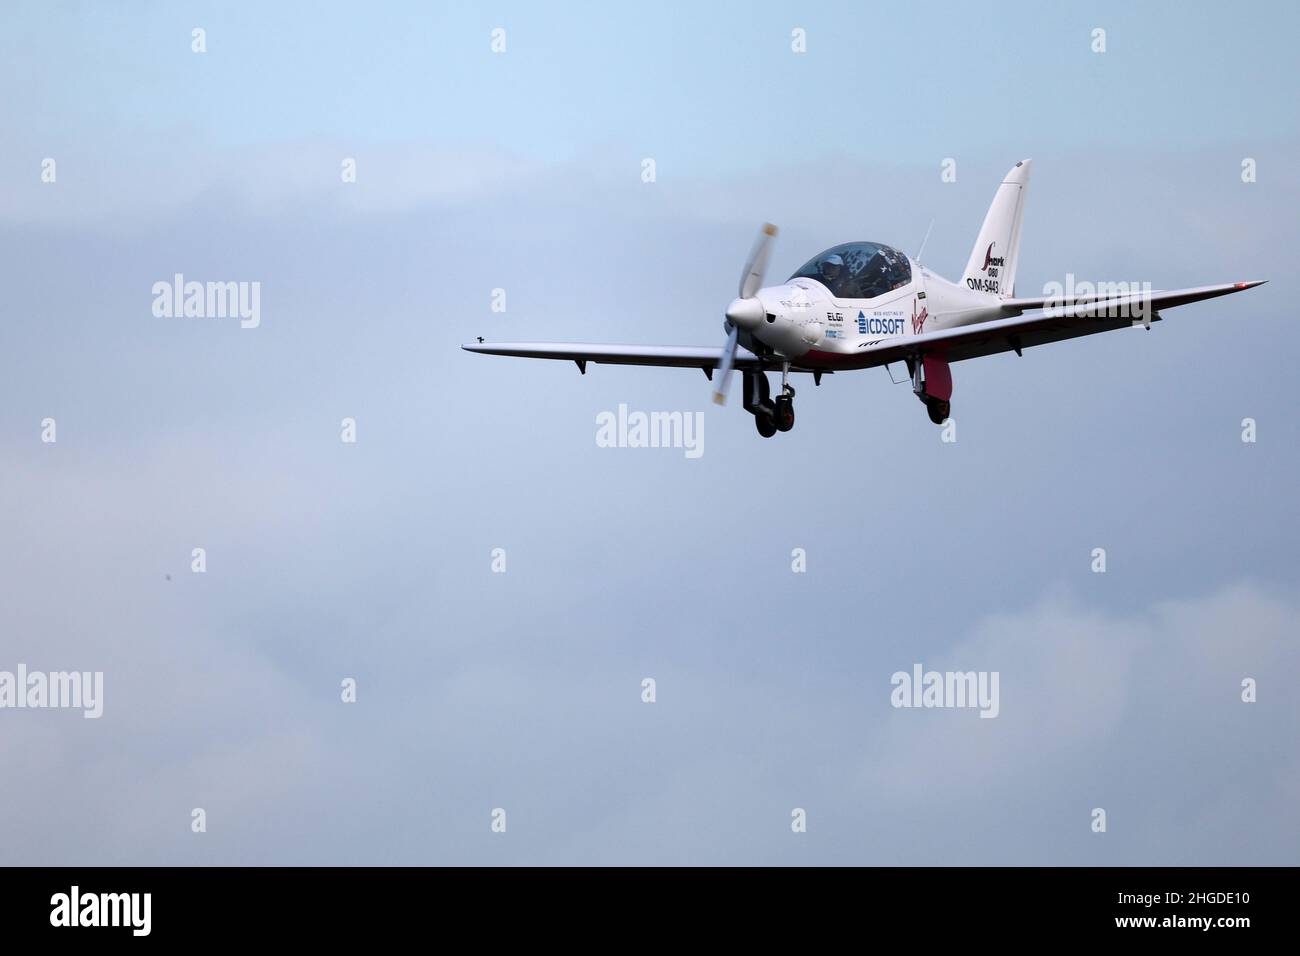 Belgian-British pilot Zara Rutherford, 19, arrives at Kortrijk-Wevelgem  Airport after a round-the-world trip in a light aircraft, becoming the  youngest female pilot to circle the planet alone, in Wevelgem, Belgium,  January 20,